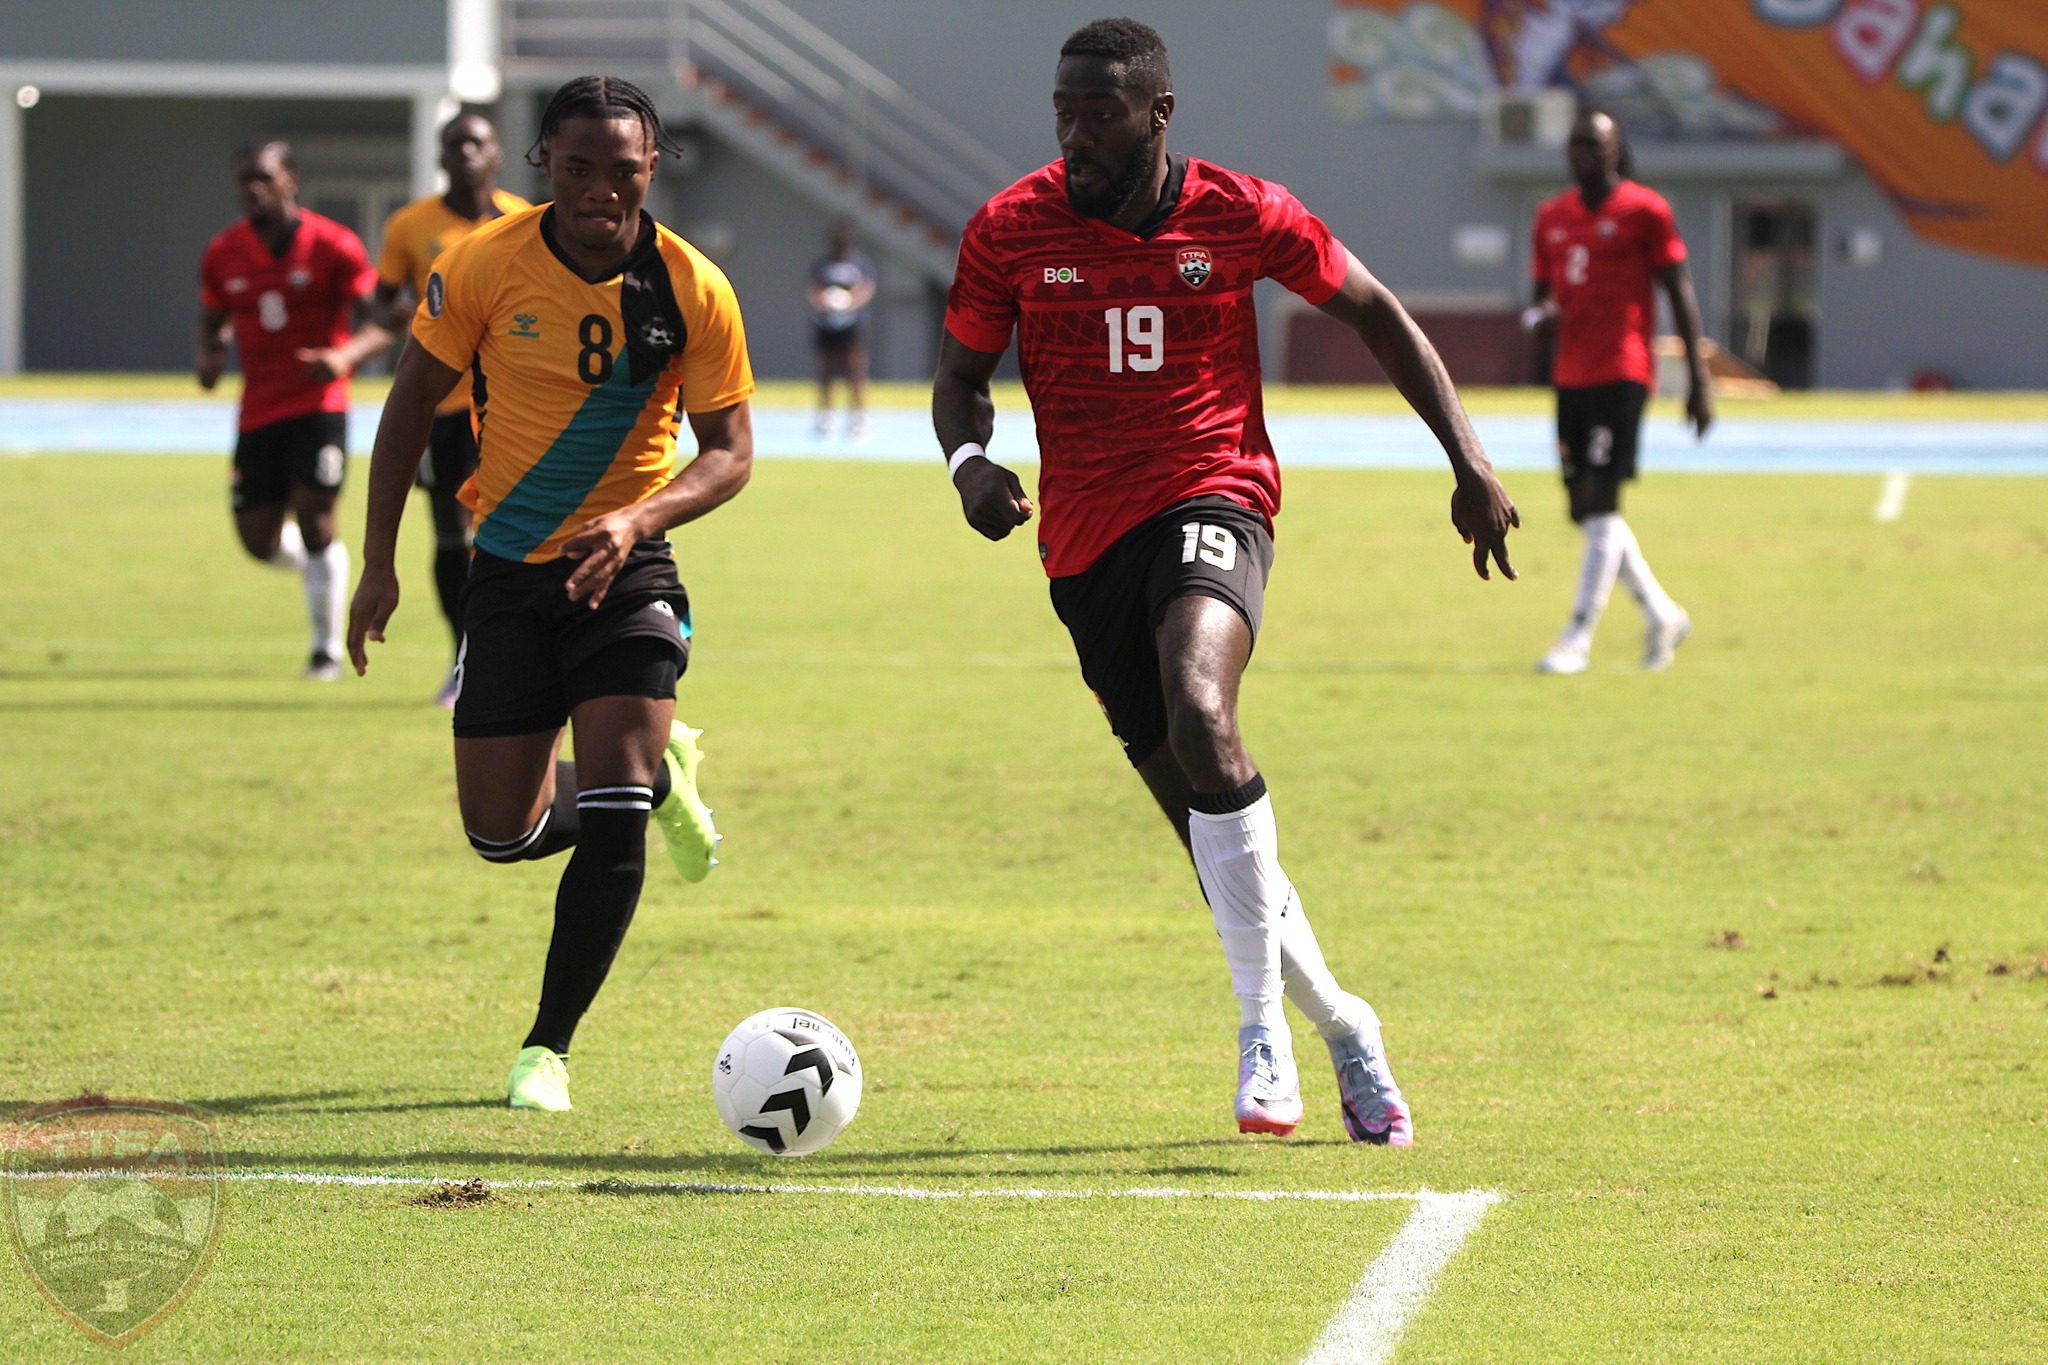 T&T net 3-0 win over Bahamas in CONCACAF Nations League action